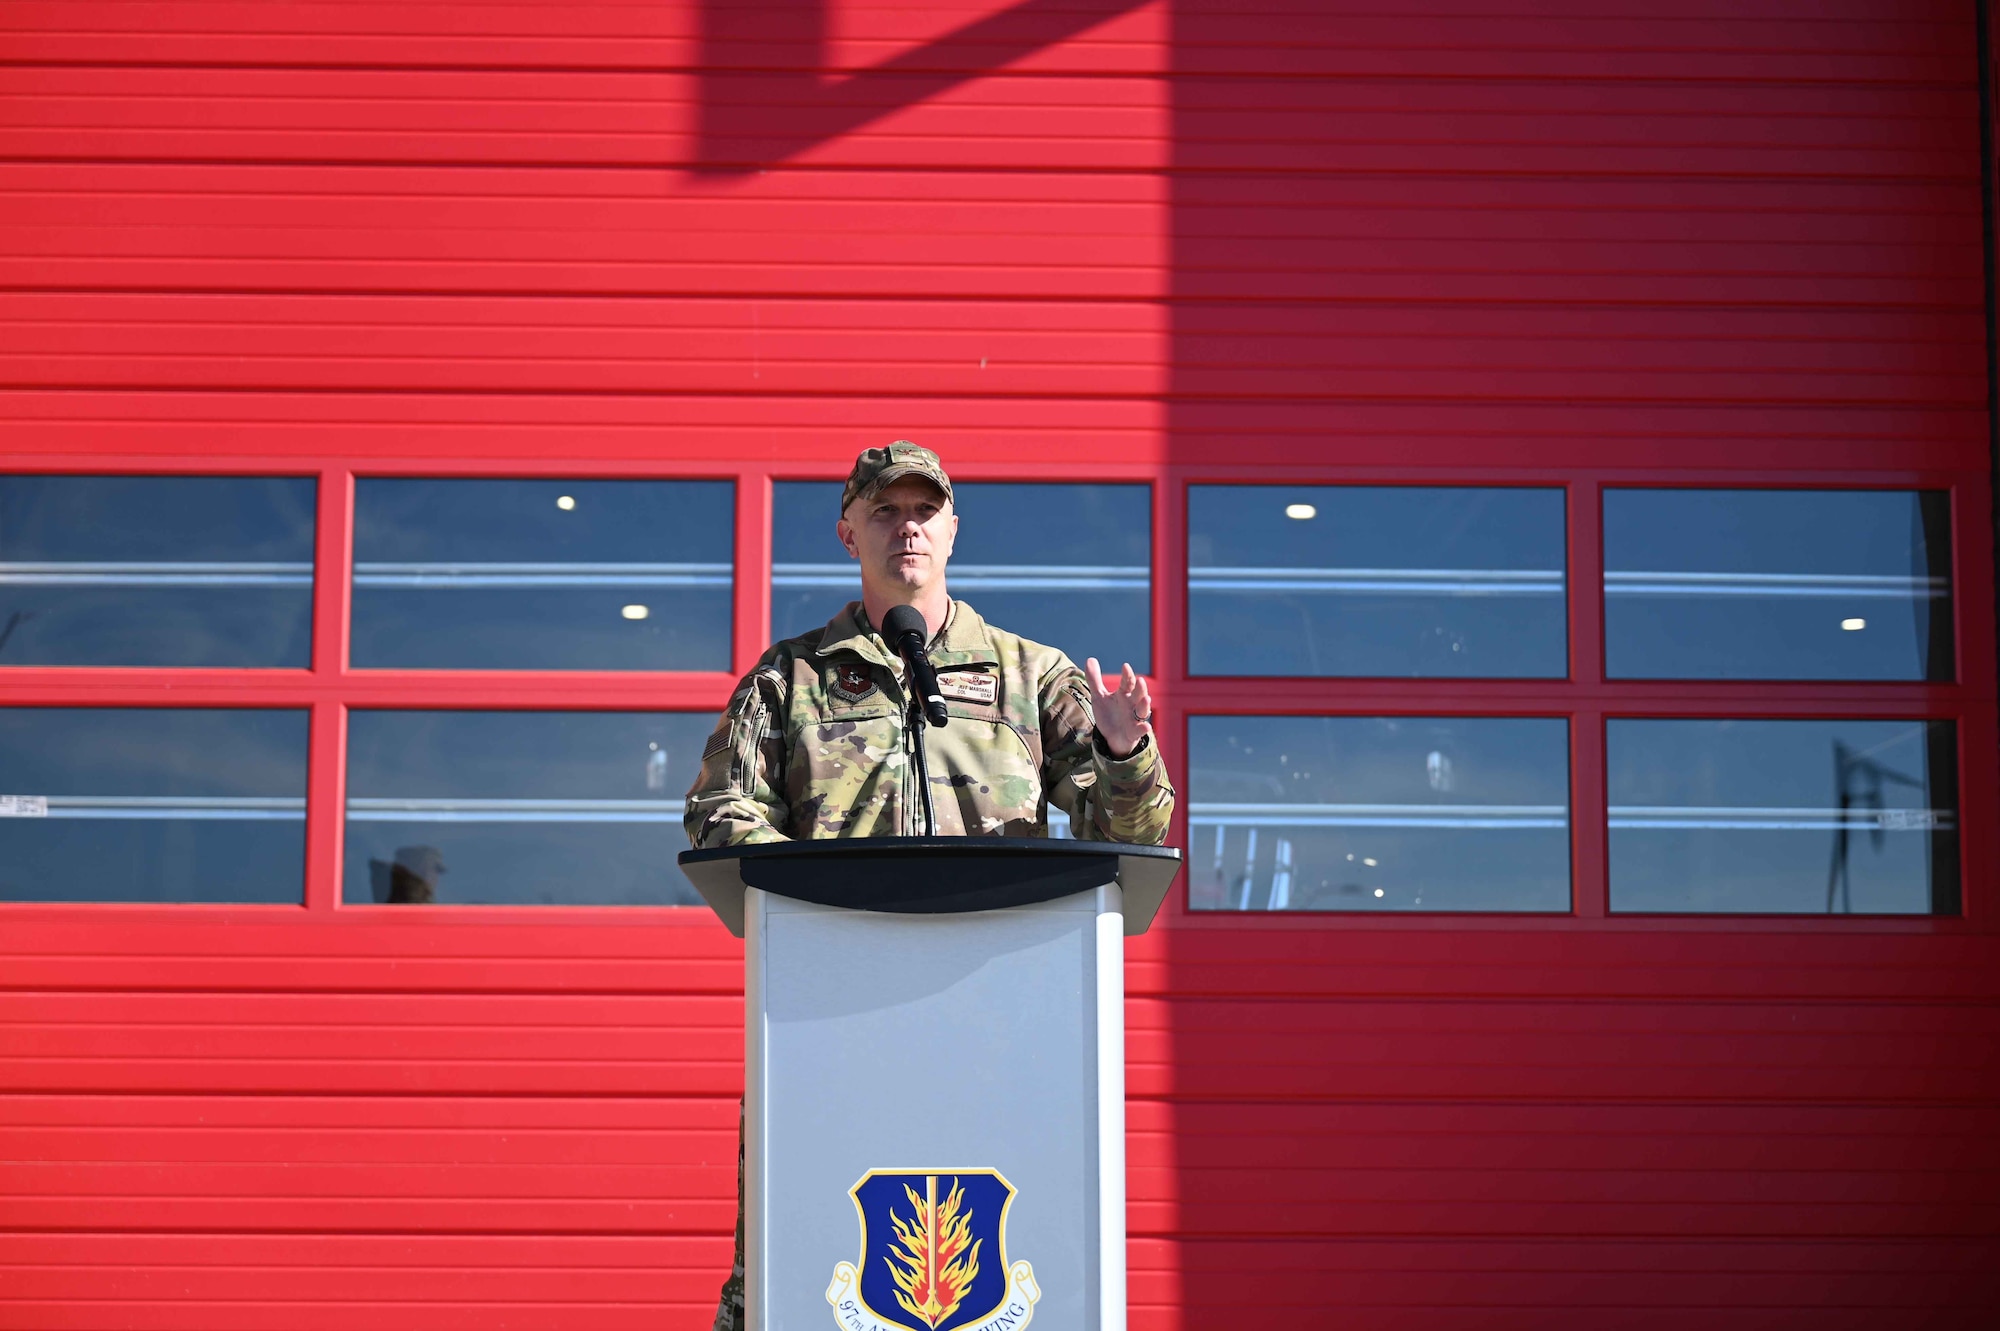 U.S. Air Force Col. Jeff Marshall, 97th Air Mobility Wing (AMW) commander, gives a speech at the opening of the 97th Civil Engineer Squadron’s headquarters fire station at Altus Air Force Base, Oklahoma, Dec. 1, 2023. Marshall is the ninth 97th AMW commander to oversee the new fire station project. (U.S Air Force photo by Airman 1st Class Kari Degraffenreed)